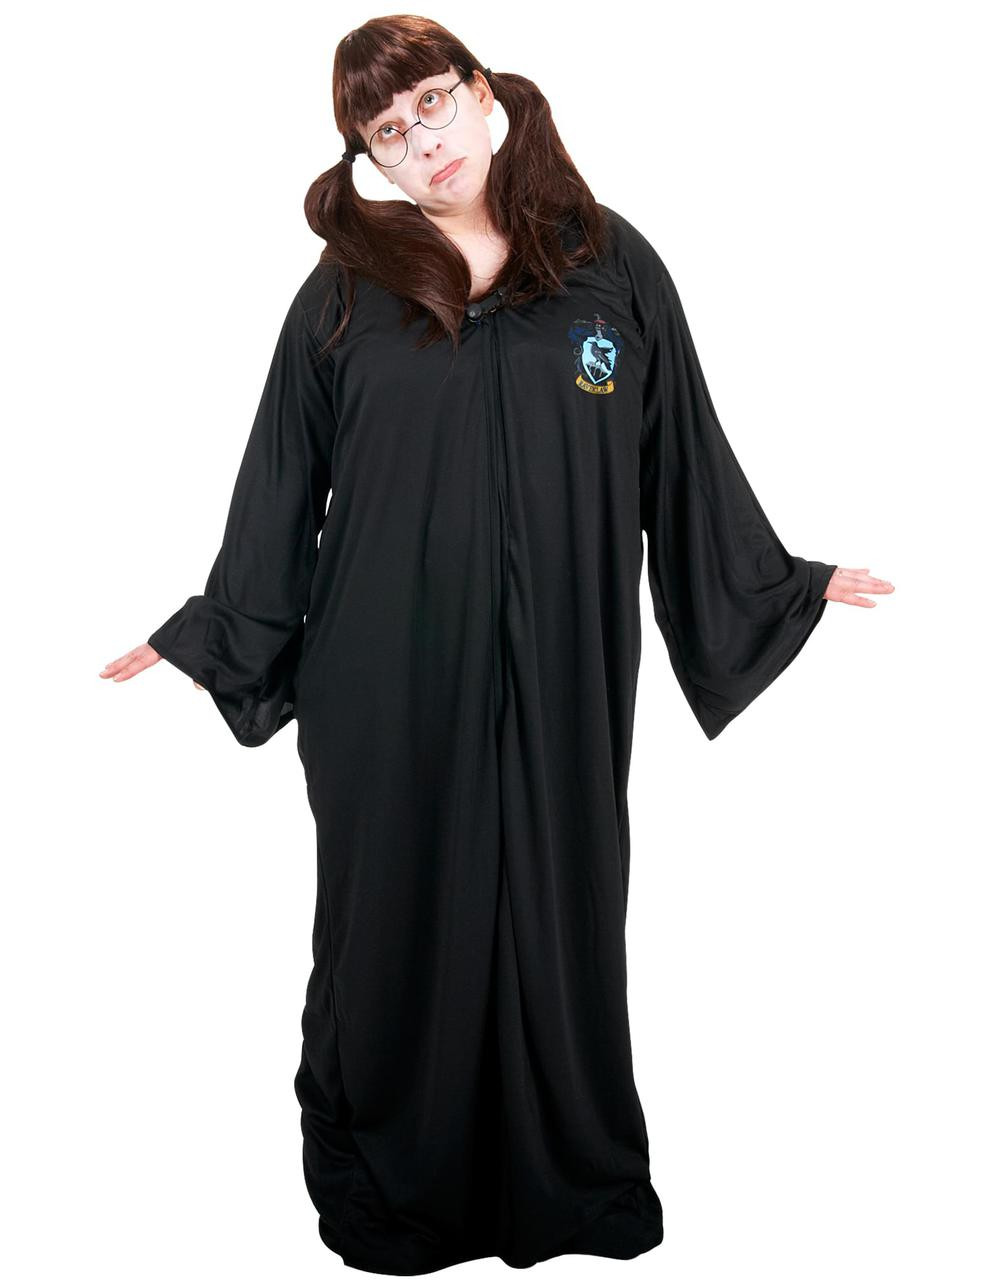 Moaning Myrtle Adult Costume Kit - ThePartyWorks